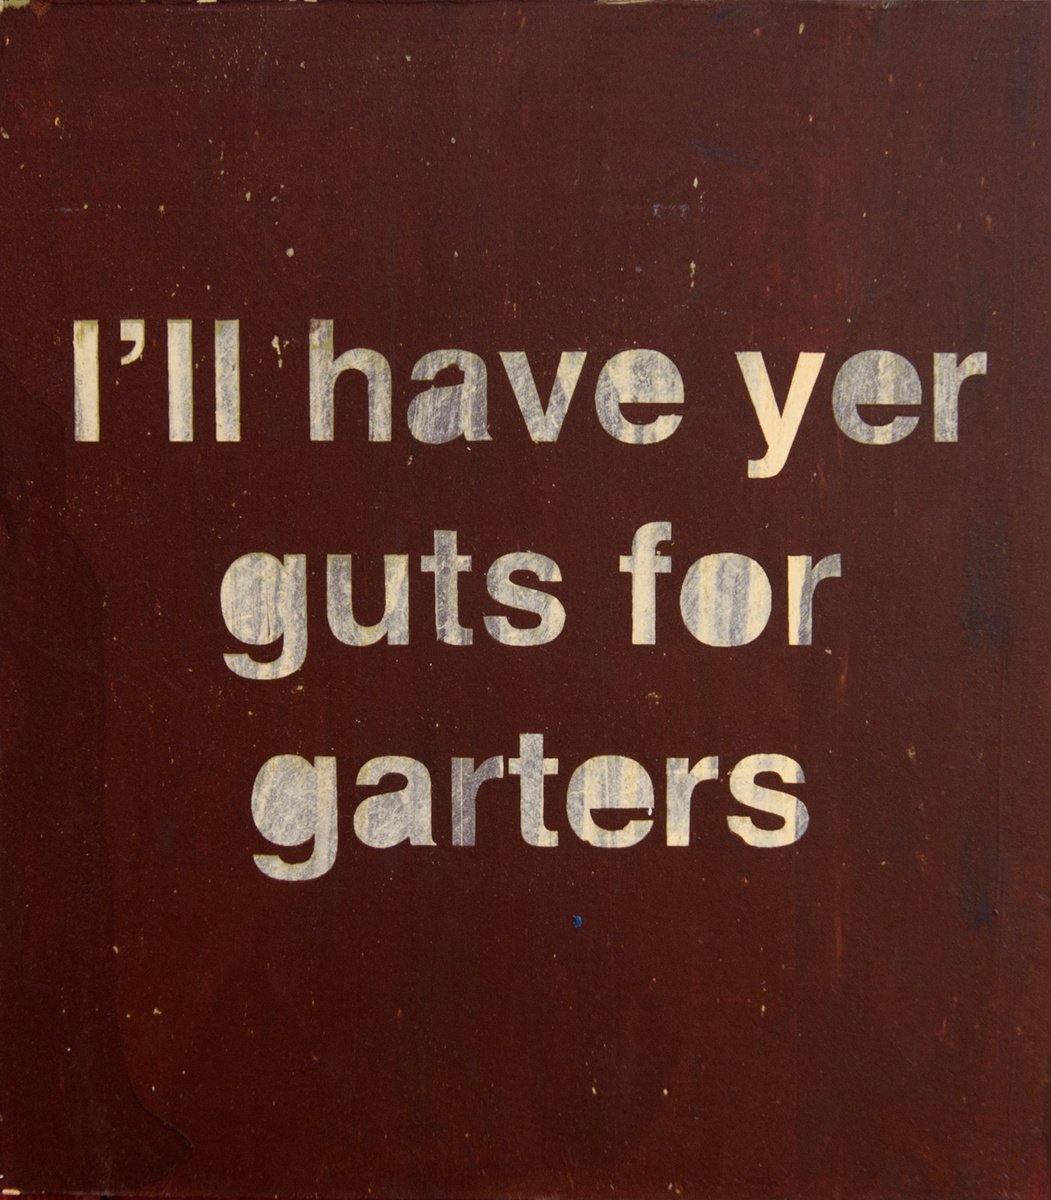 l’ll have yer guts for garters by Ian McKay